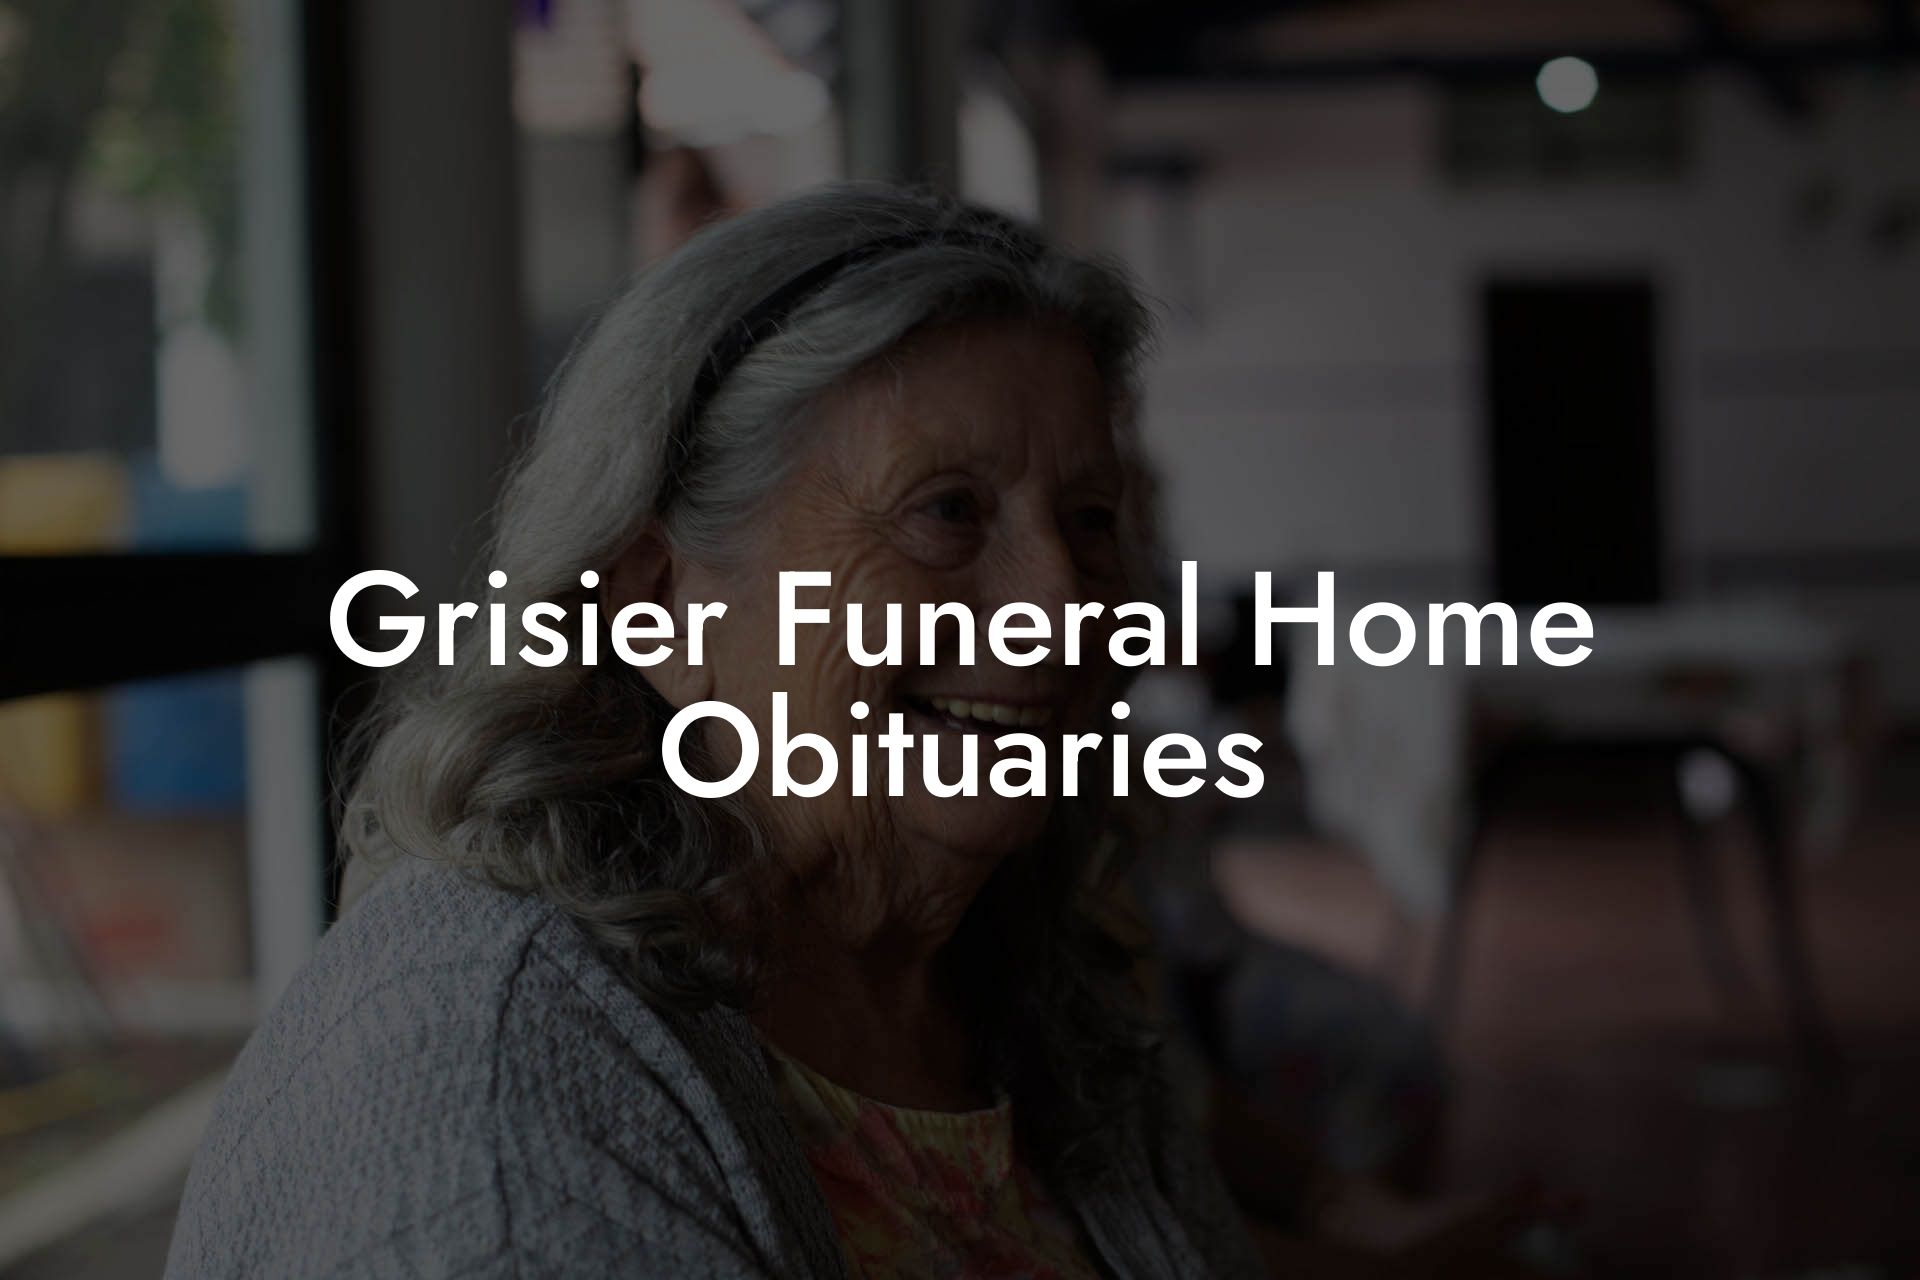 Grisier Funeral Home Obituaries